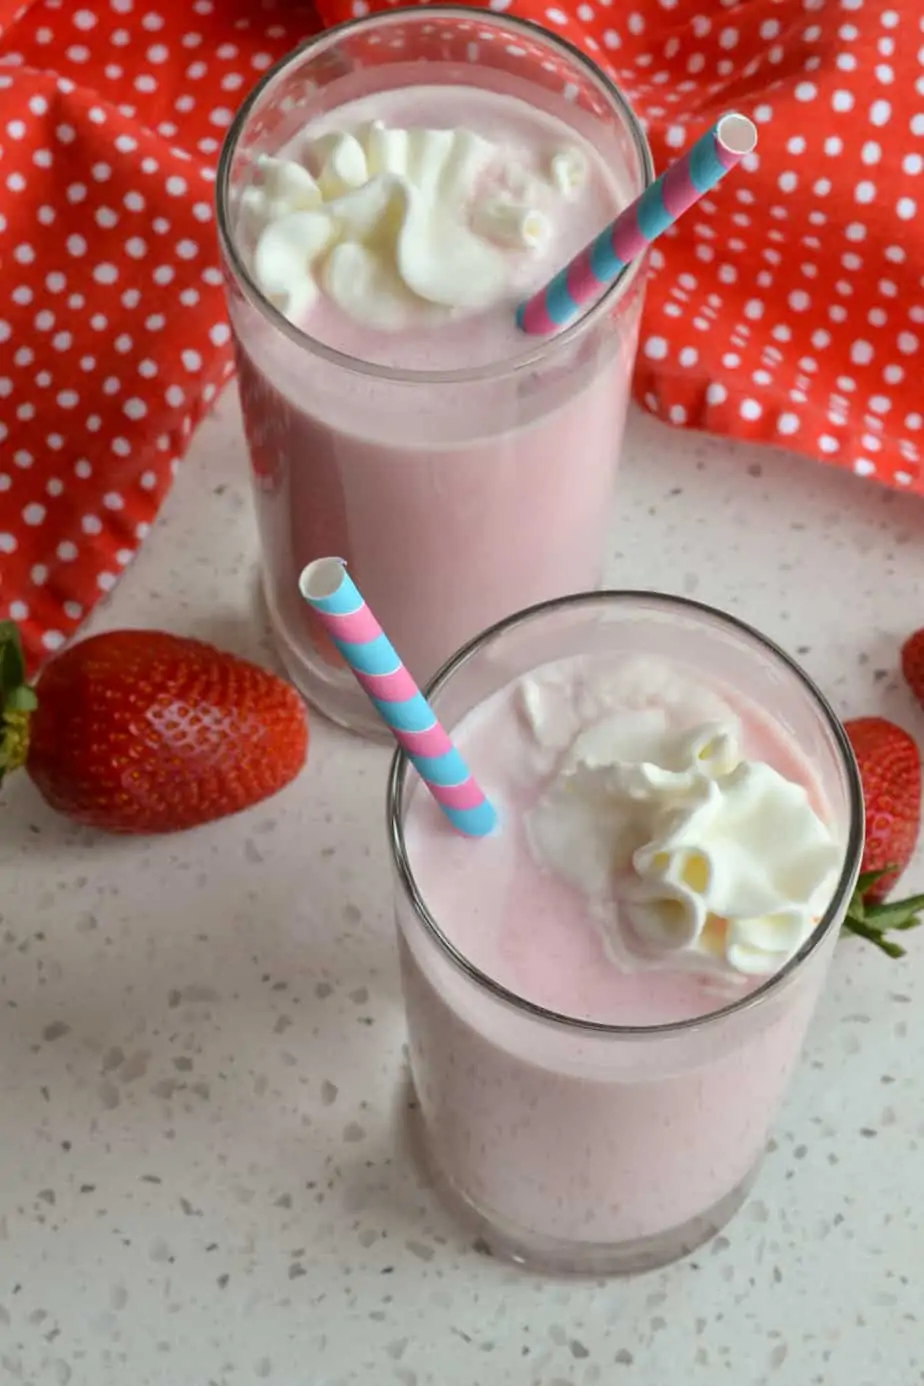 Ice cold milk is combined with homemade strawberry syrup for a real taste treat. 